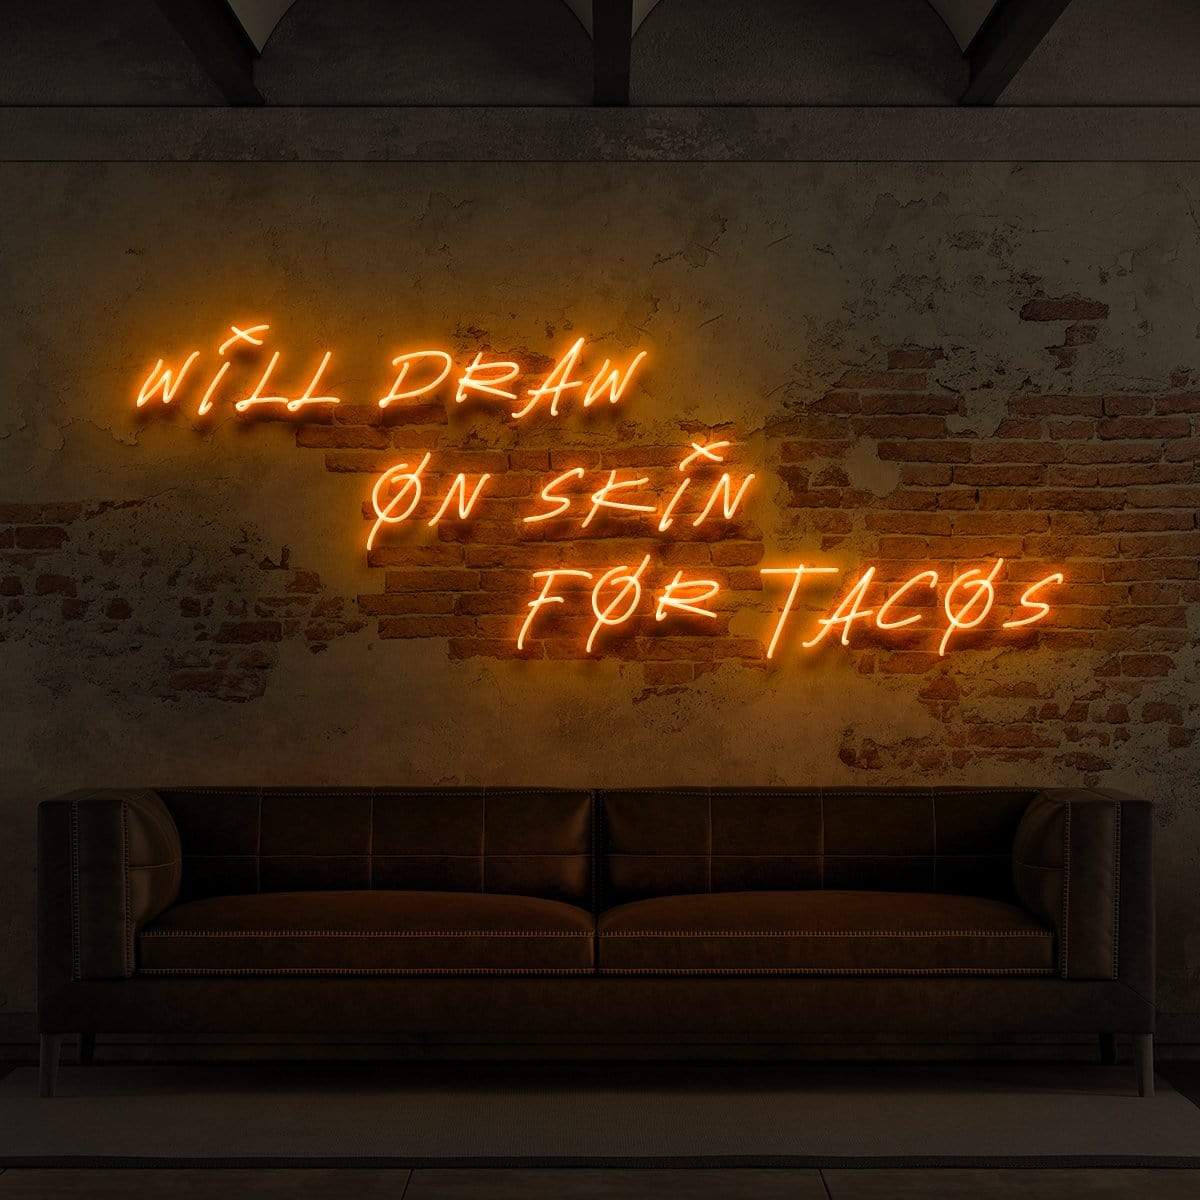 "Will Draw On Skin For Tacos" Neon Sign for Tattoo Parlours 90cm (3ft) / Orange / LED Neon by Neon Icons